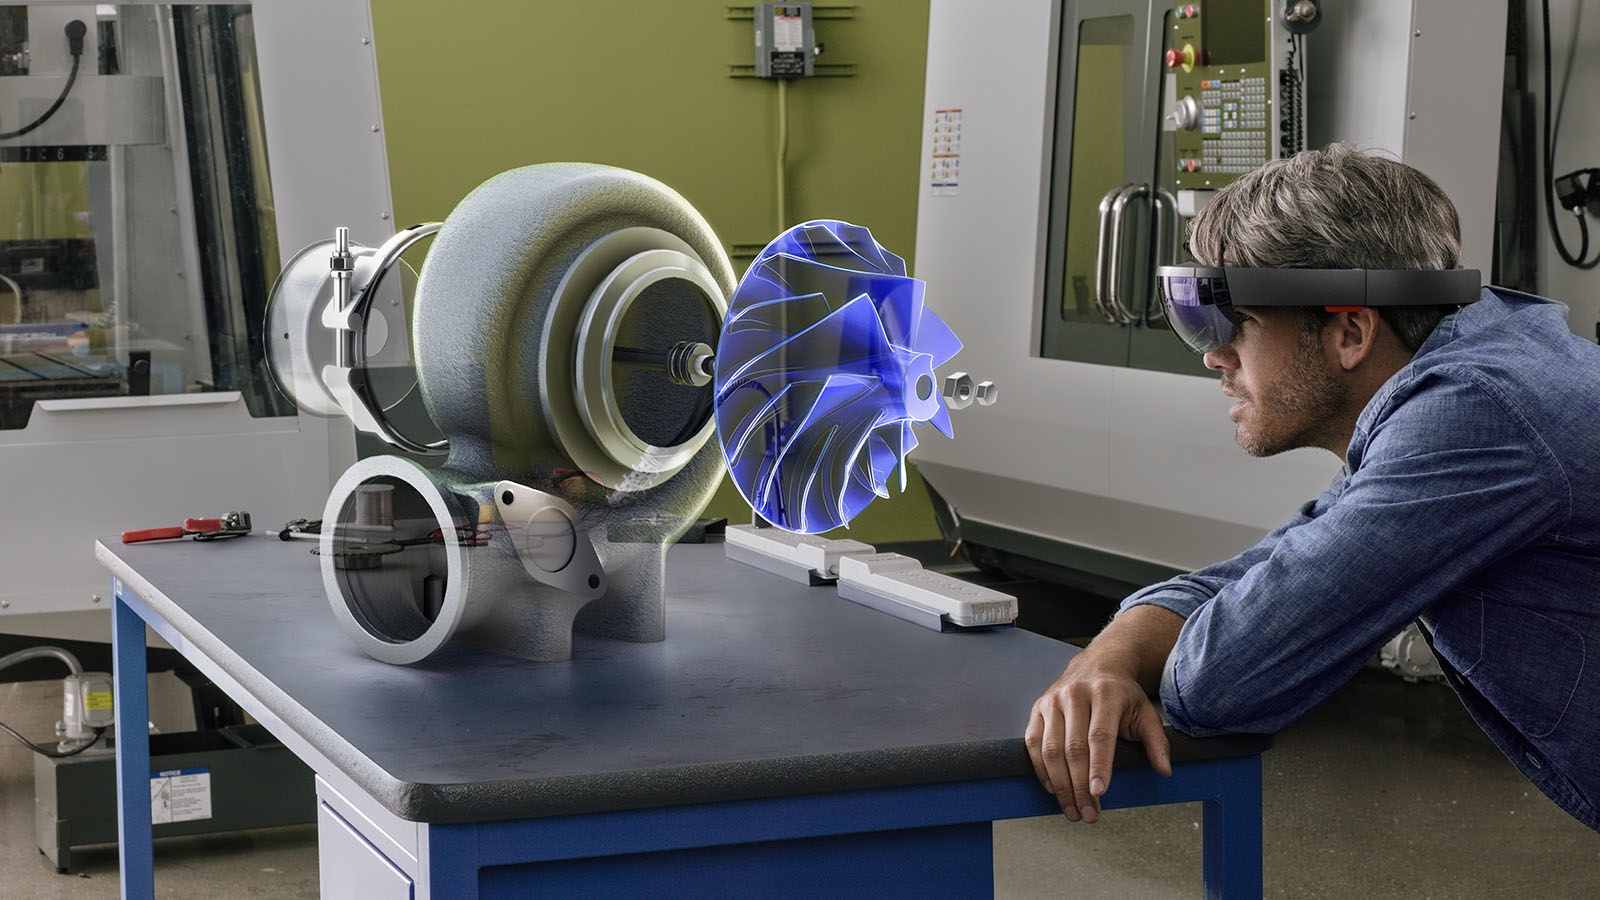 Microsoft HoloLens is now certified protective eyewear